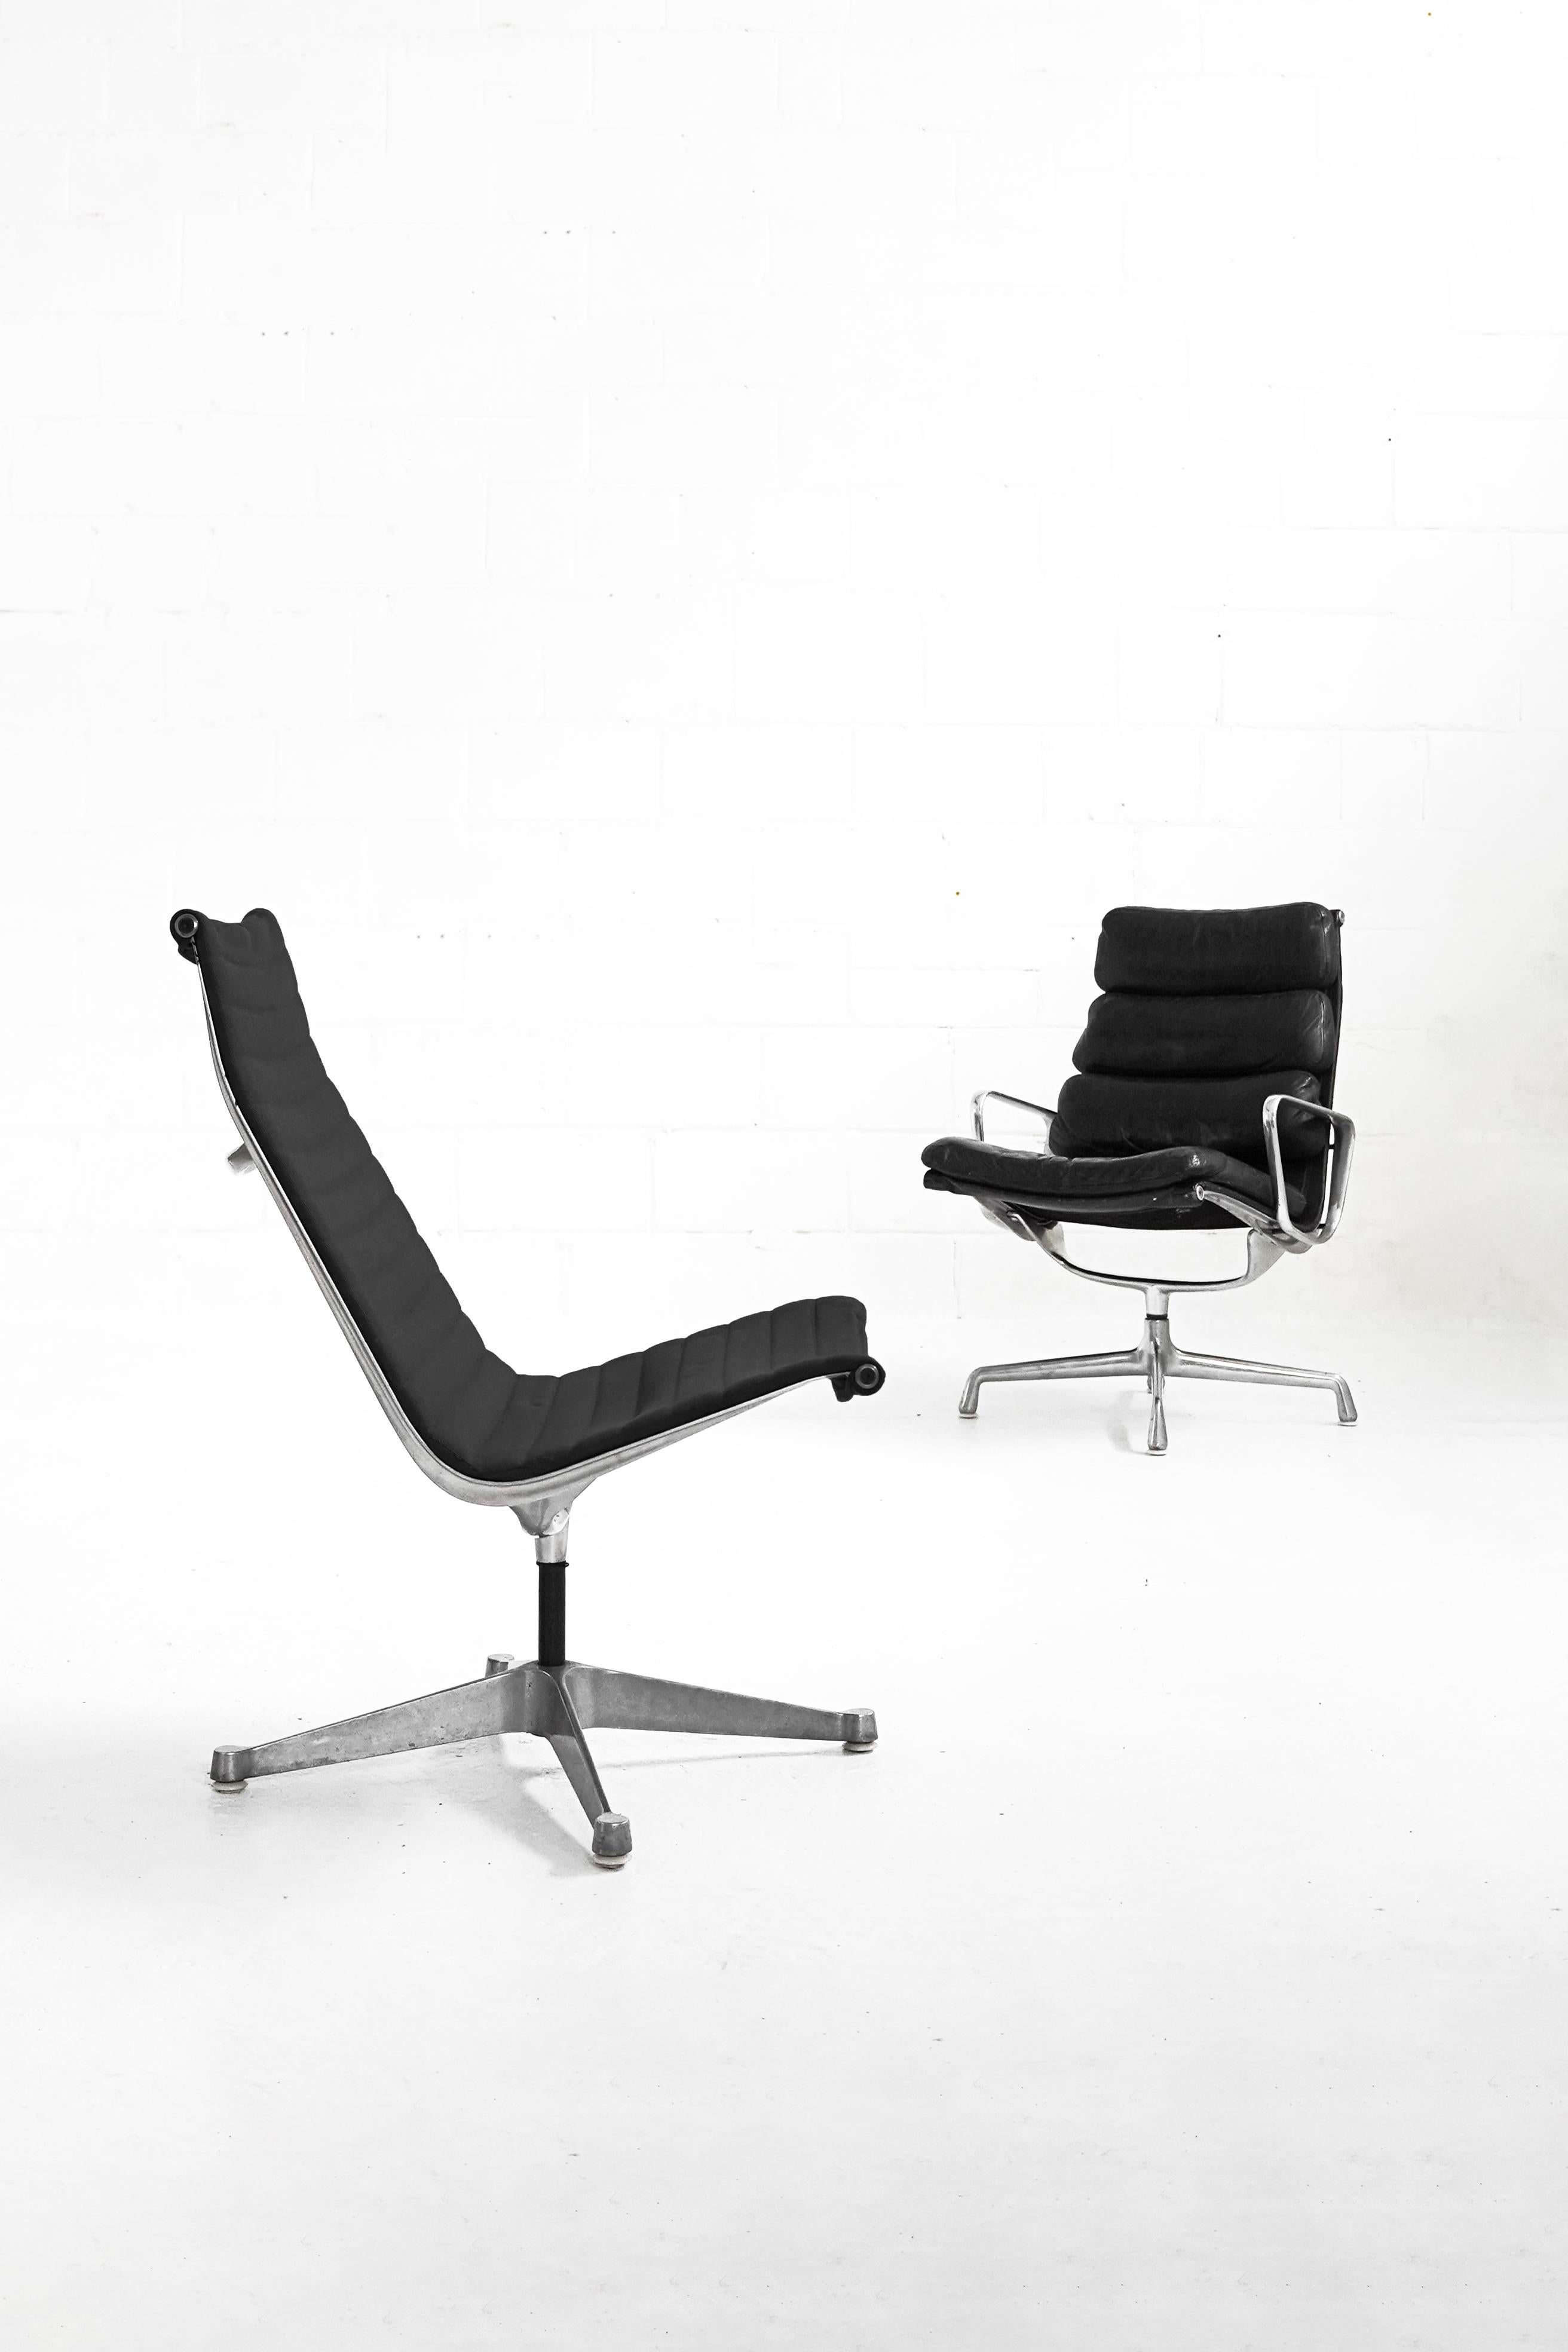 Mid-20th Century Eames Thin Pad Lounge Chair by Charles and Ray Eames for Herman Miller